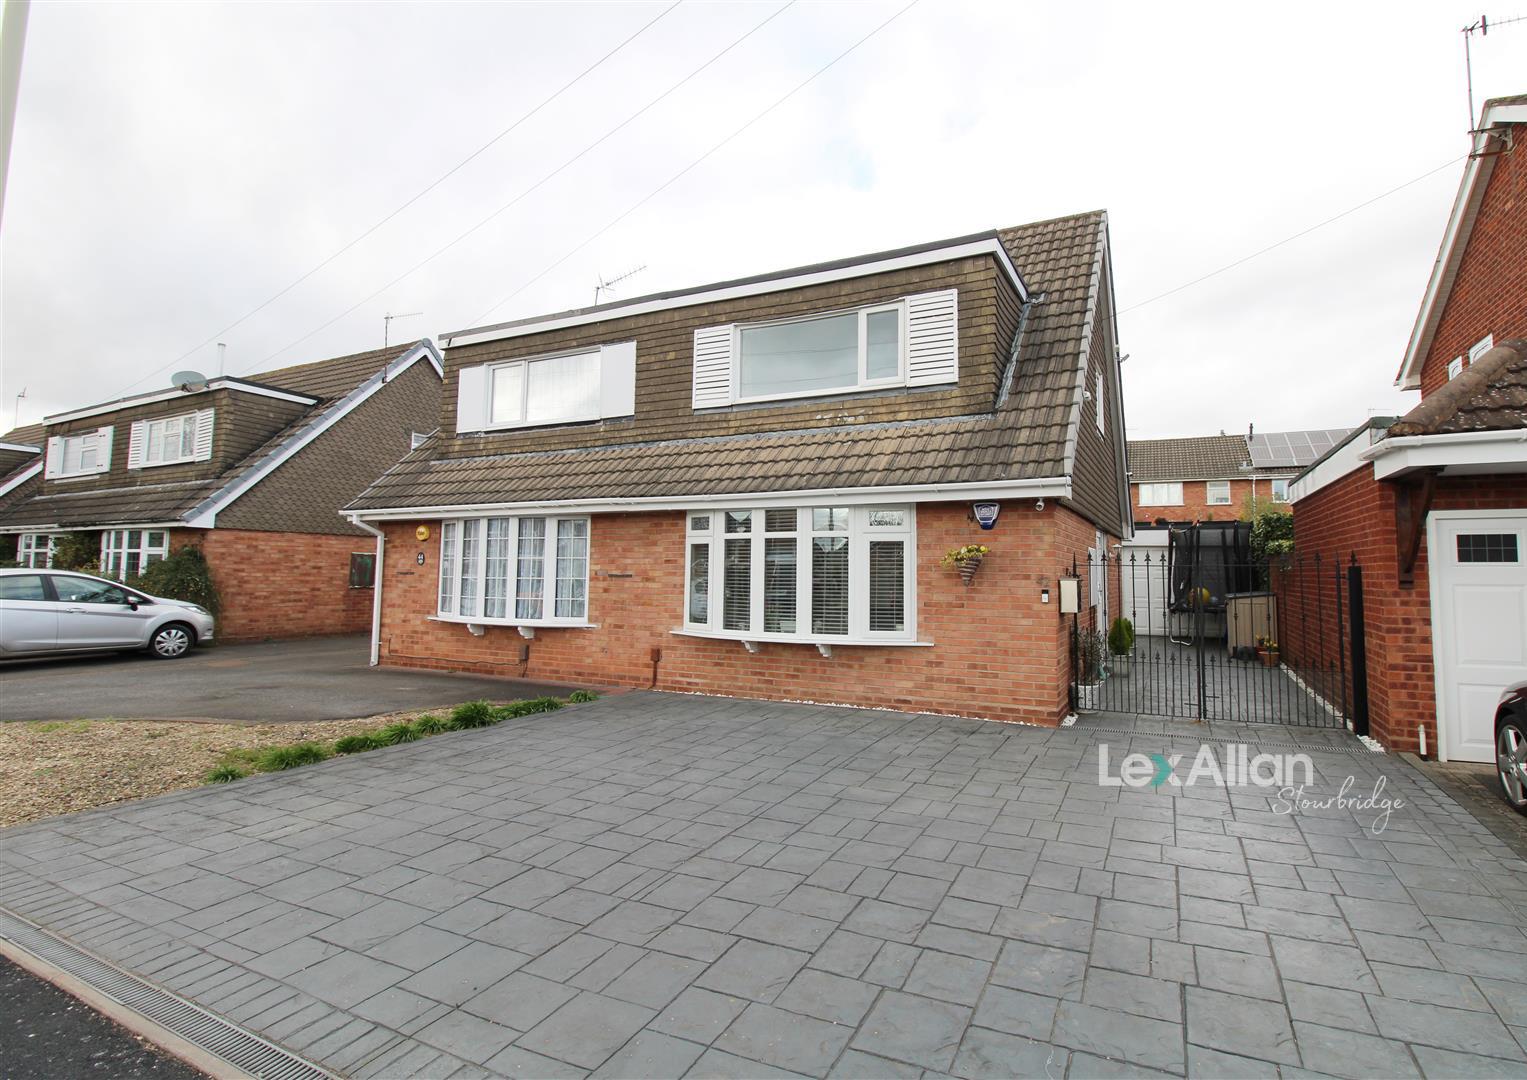 2 bed semi-detached house for sale in Marine Crescent, Stourbridge - Property Image 1